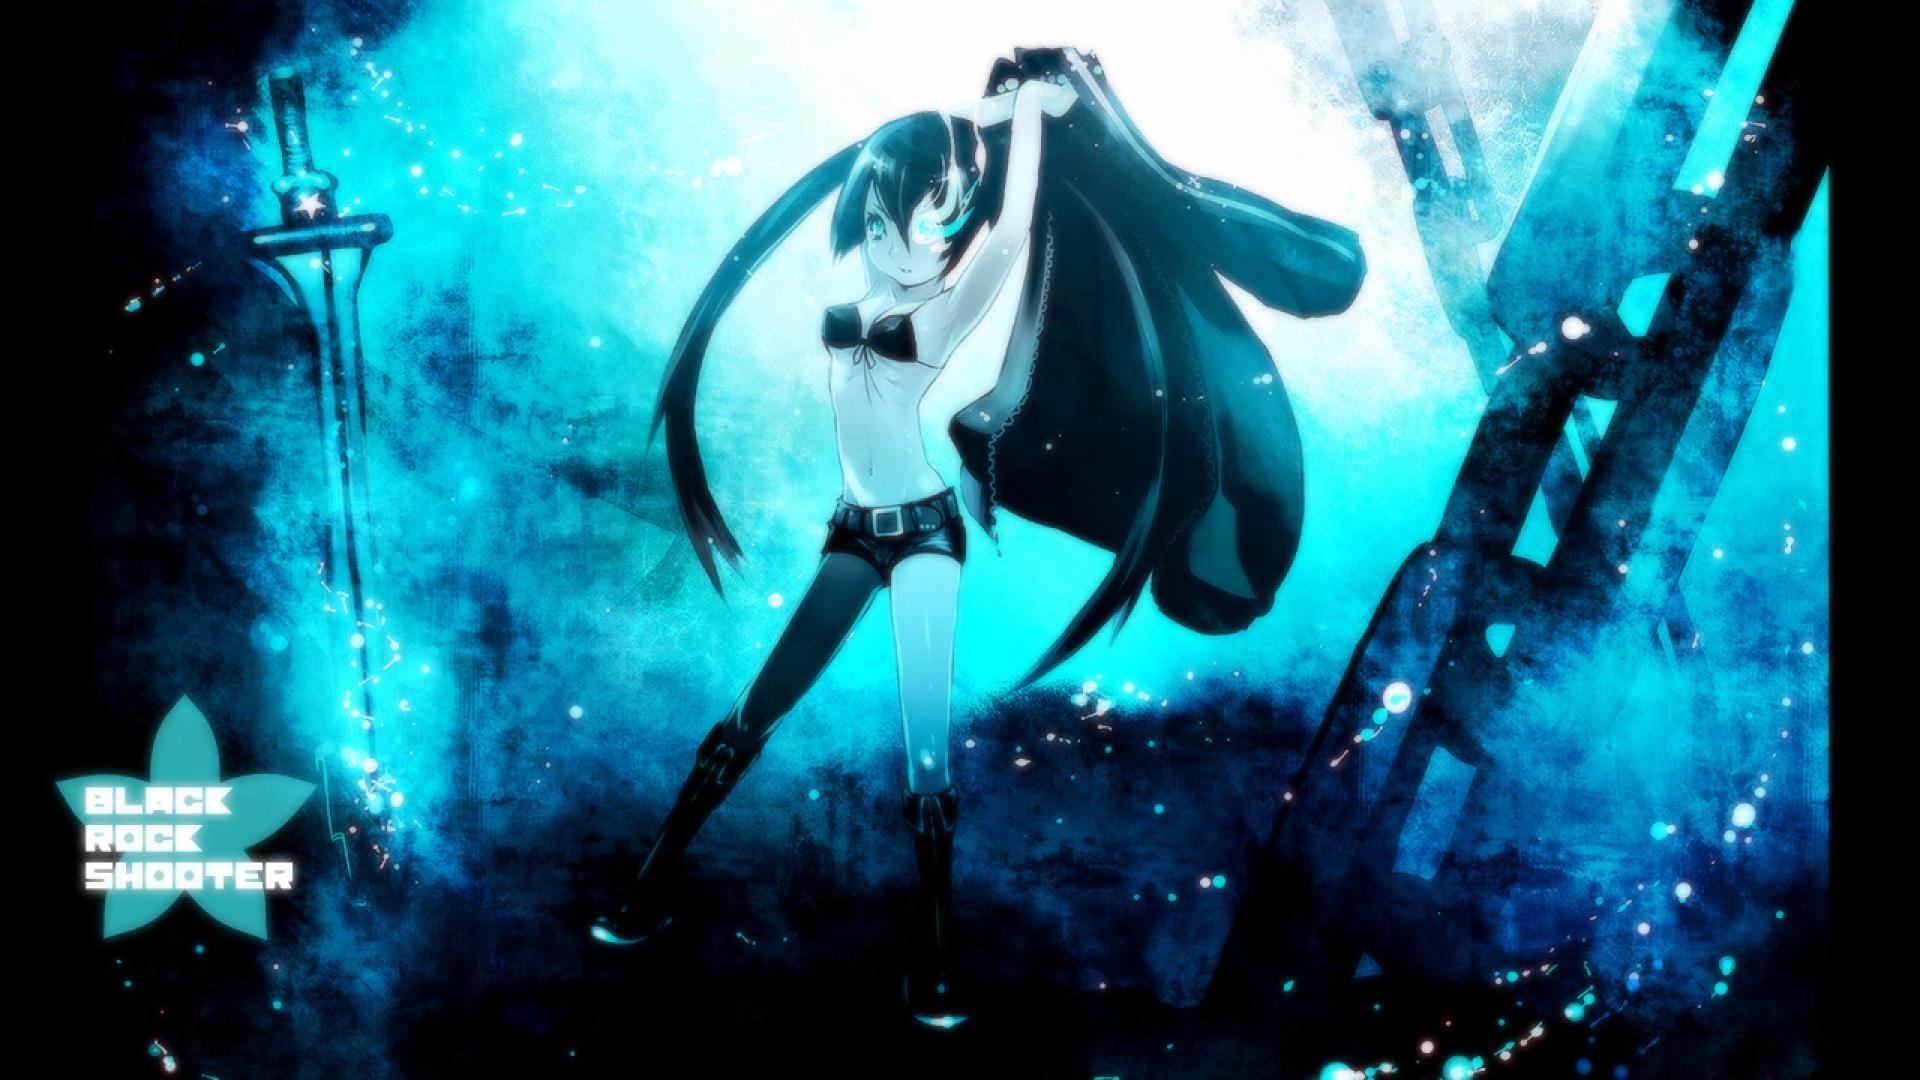 Black rock shooter wallpaper - (#183158) - High Quality and ...